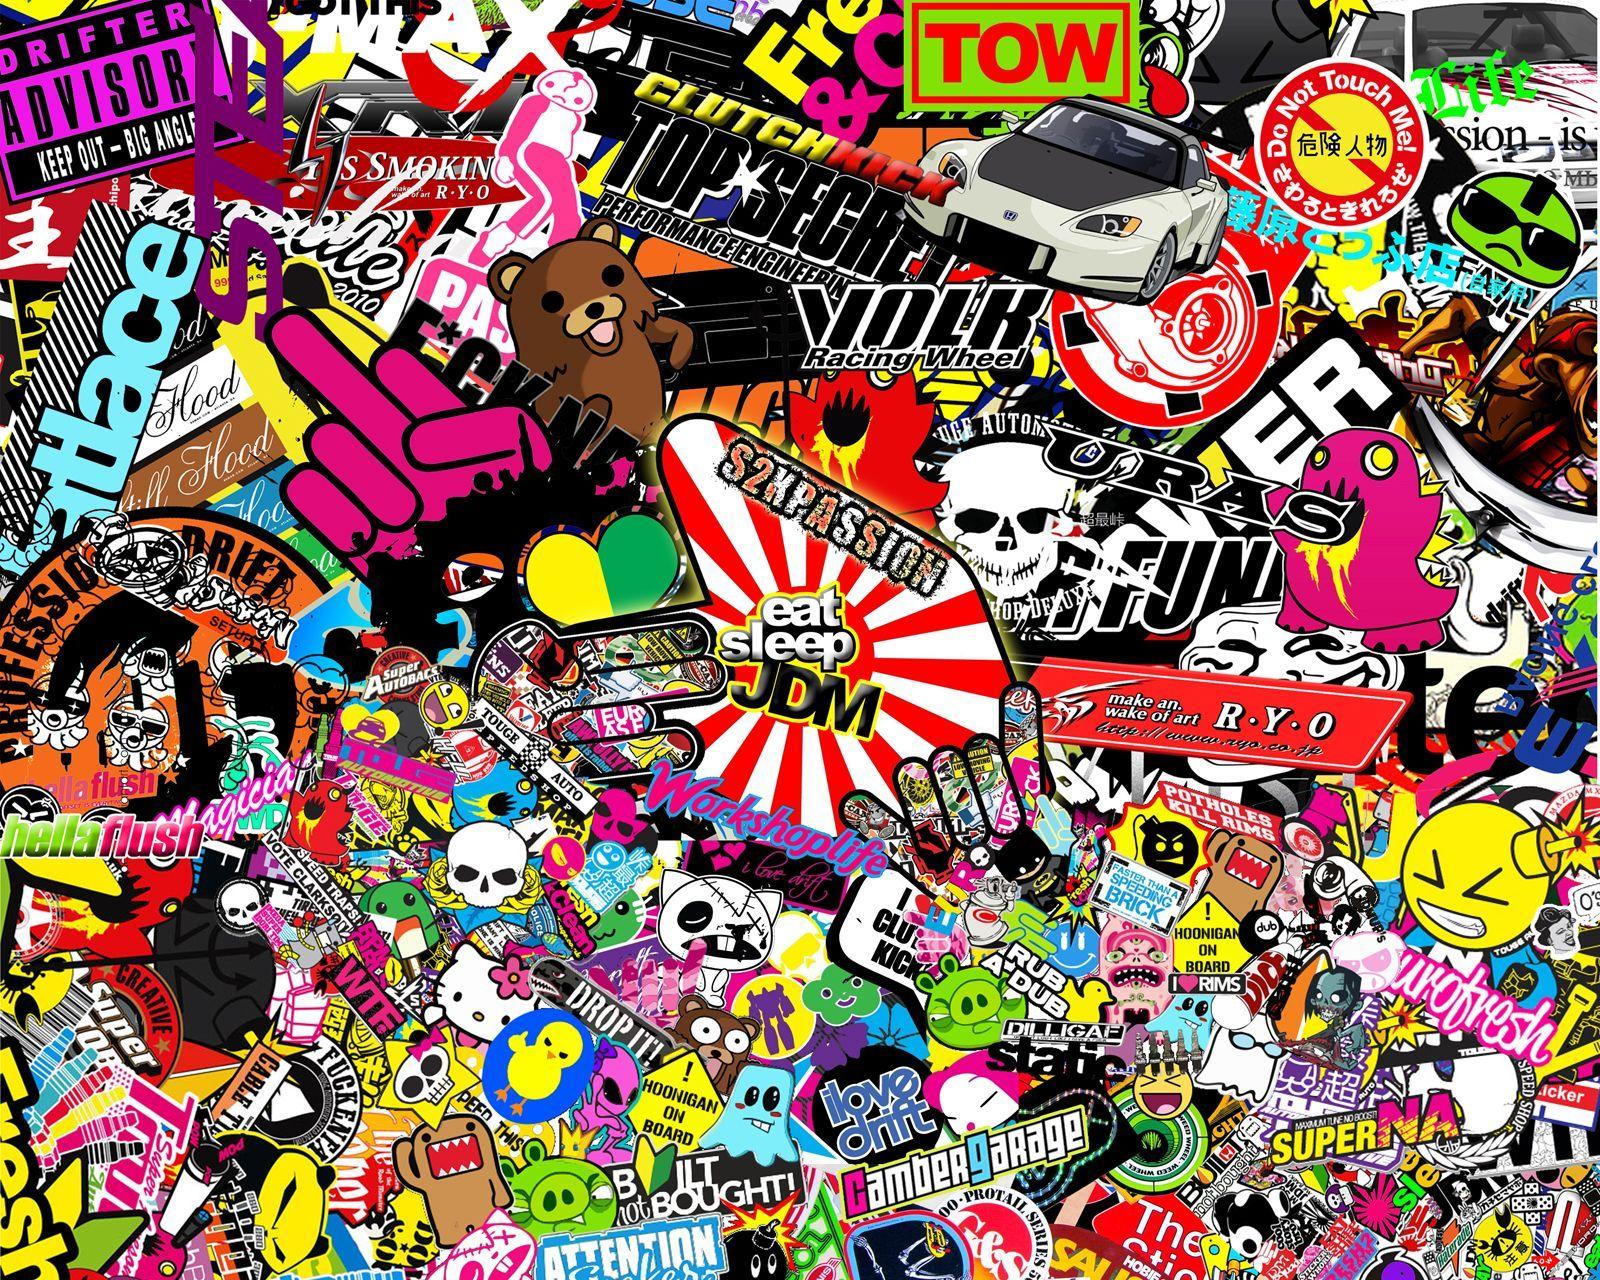 jdm sticker bomb wallpaper image download stickers style full. Home